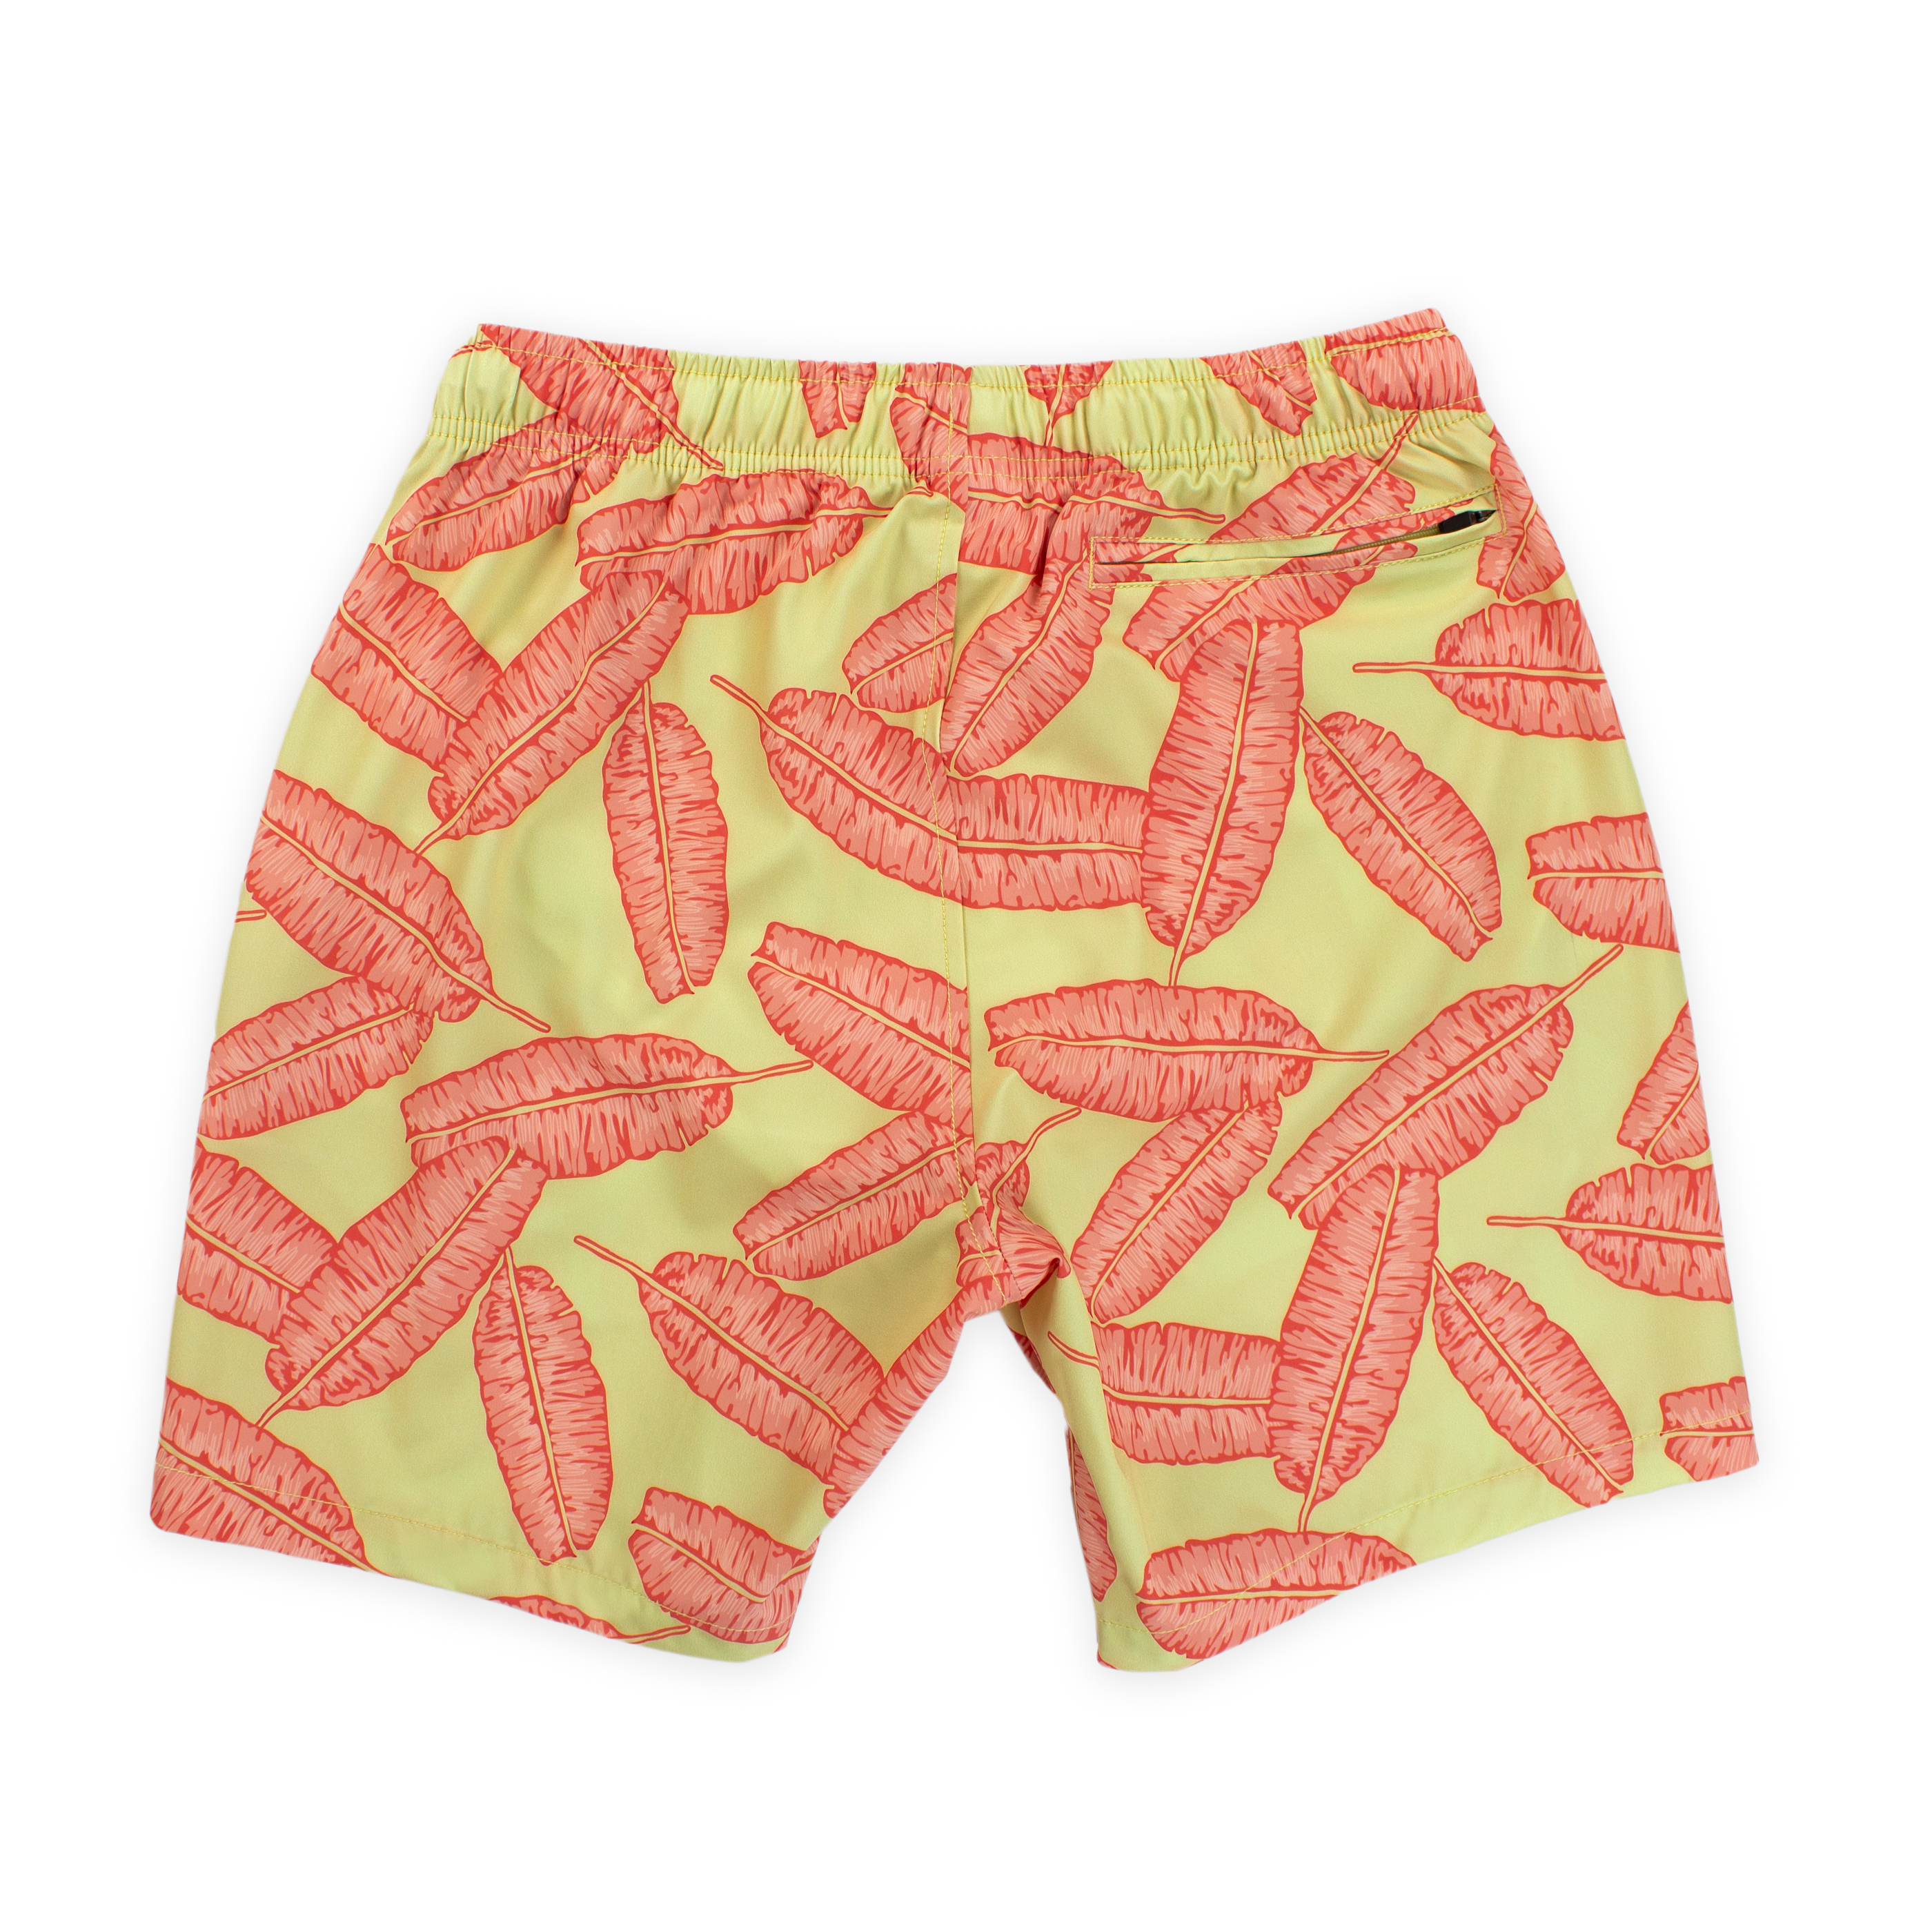 Stretch Swim 7" Banana Leaf back with yellow background and large pink banana leaves printed, with an elastic waistband and back right zippered pocket